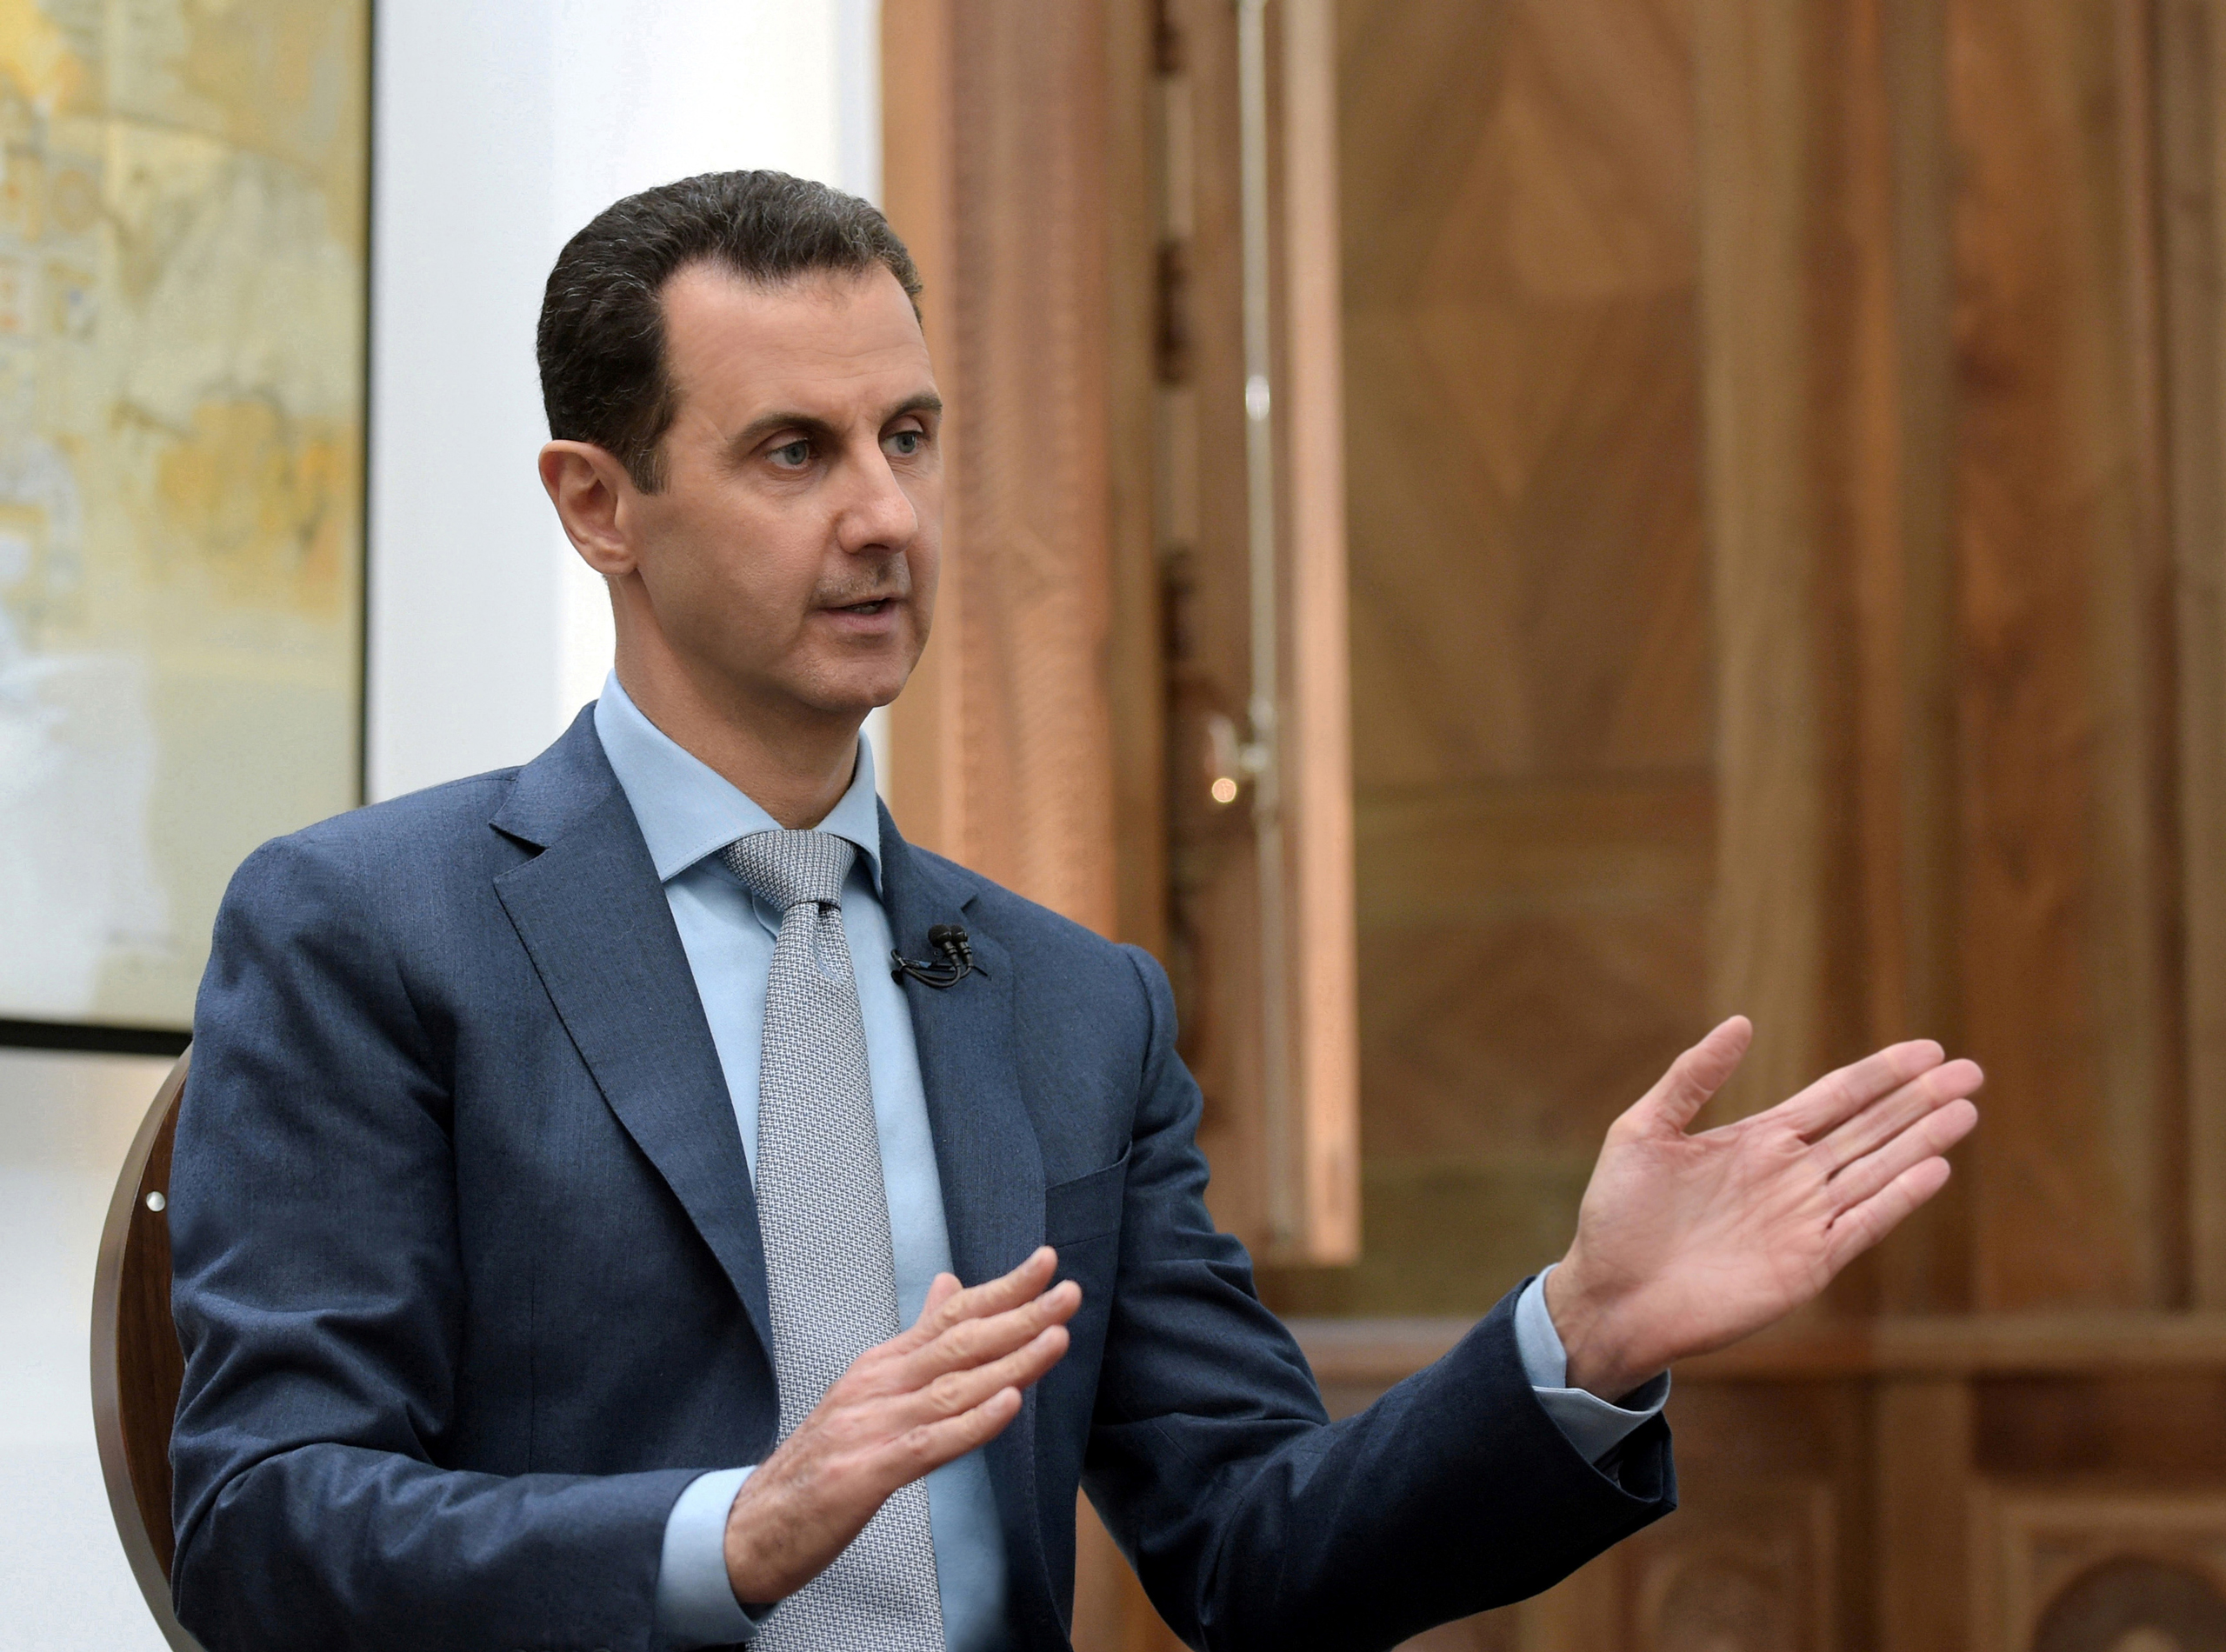 Syria's President Bashar al-Assad speaks during an interview with Yahoo News in this handout picture provided by SANA on Feb. 10, 2017. (Agencja Gazeta/Reuters)